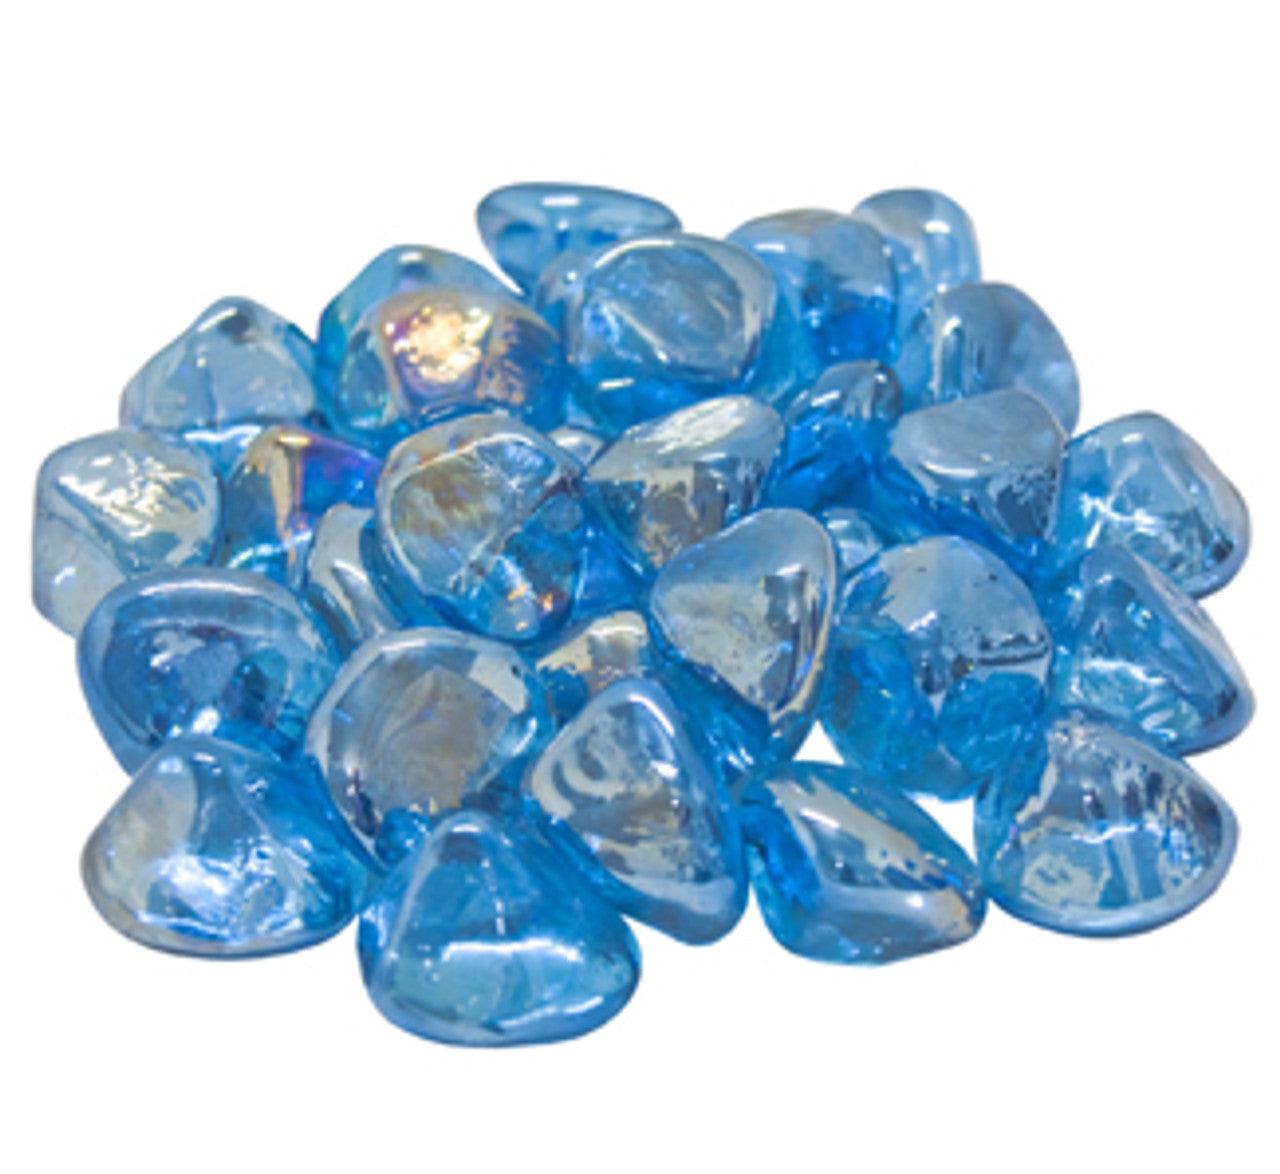 10 lb. Package of Diamond Nuggets Glass Media